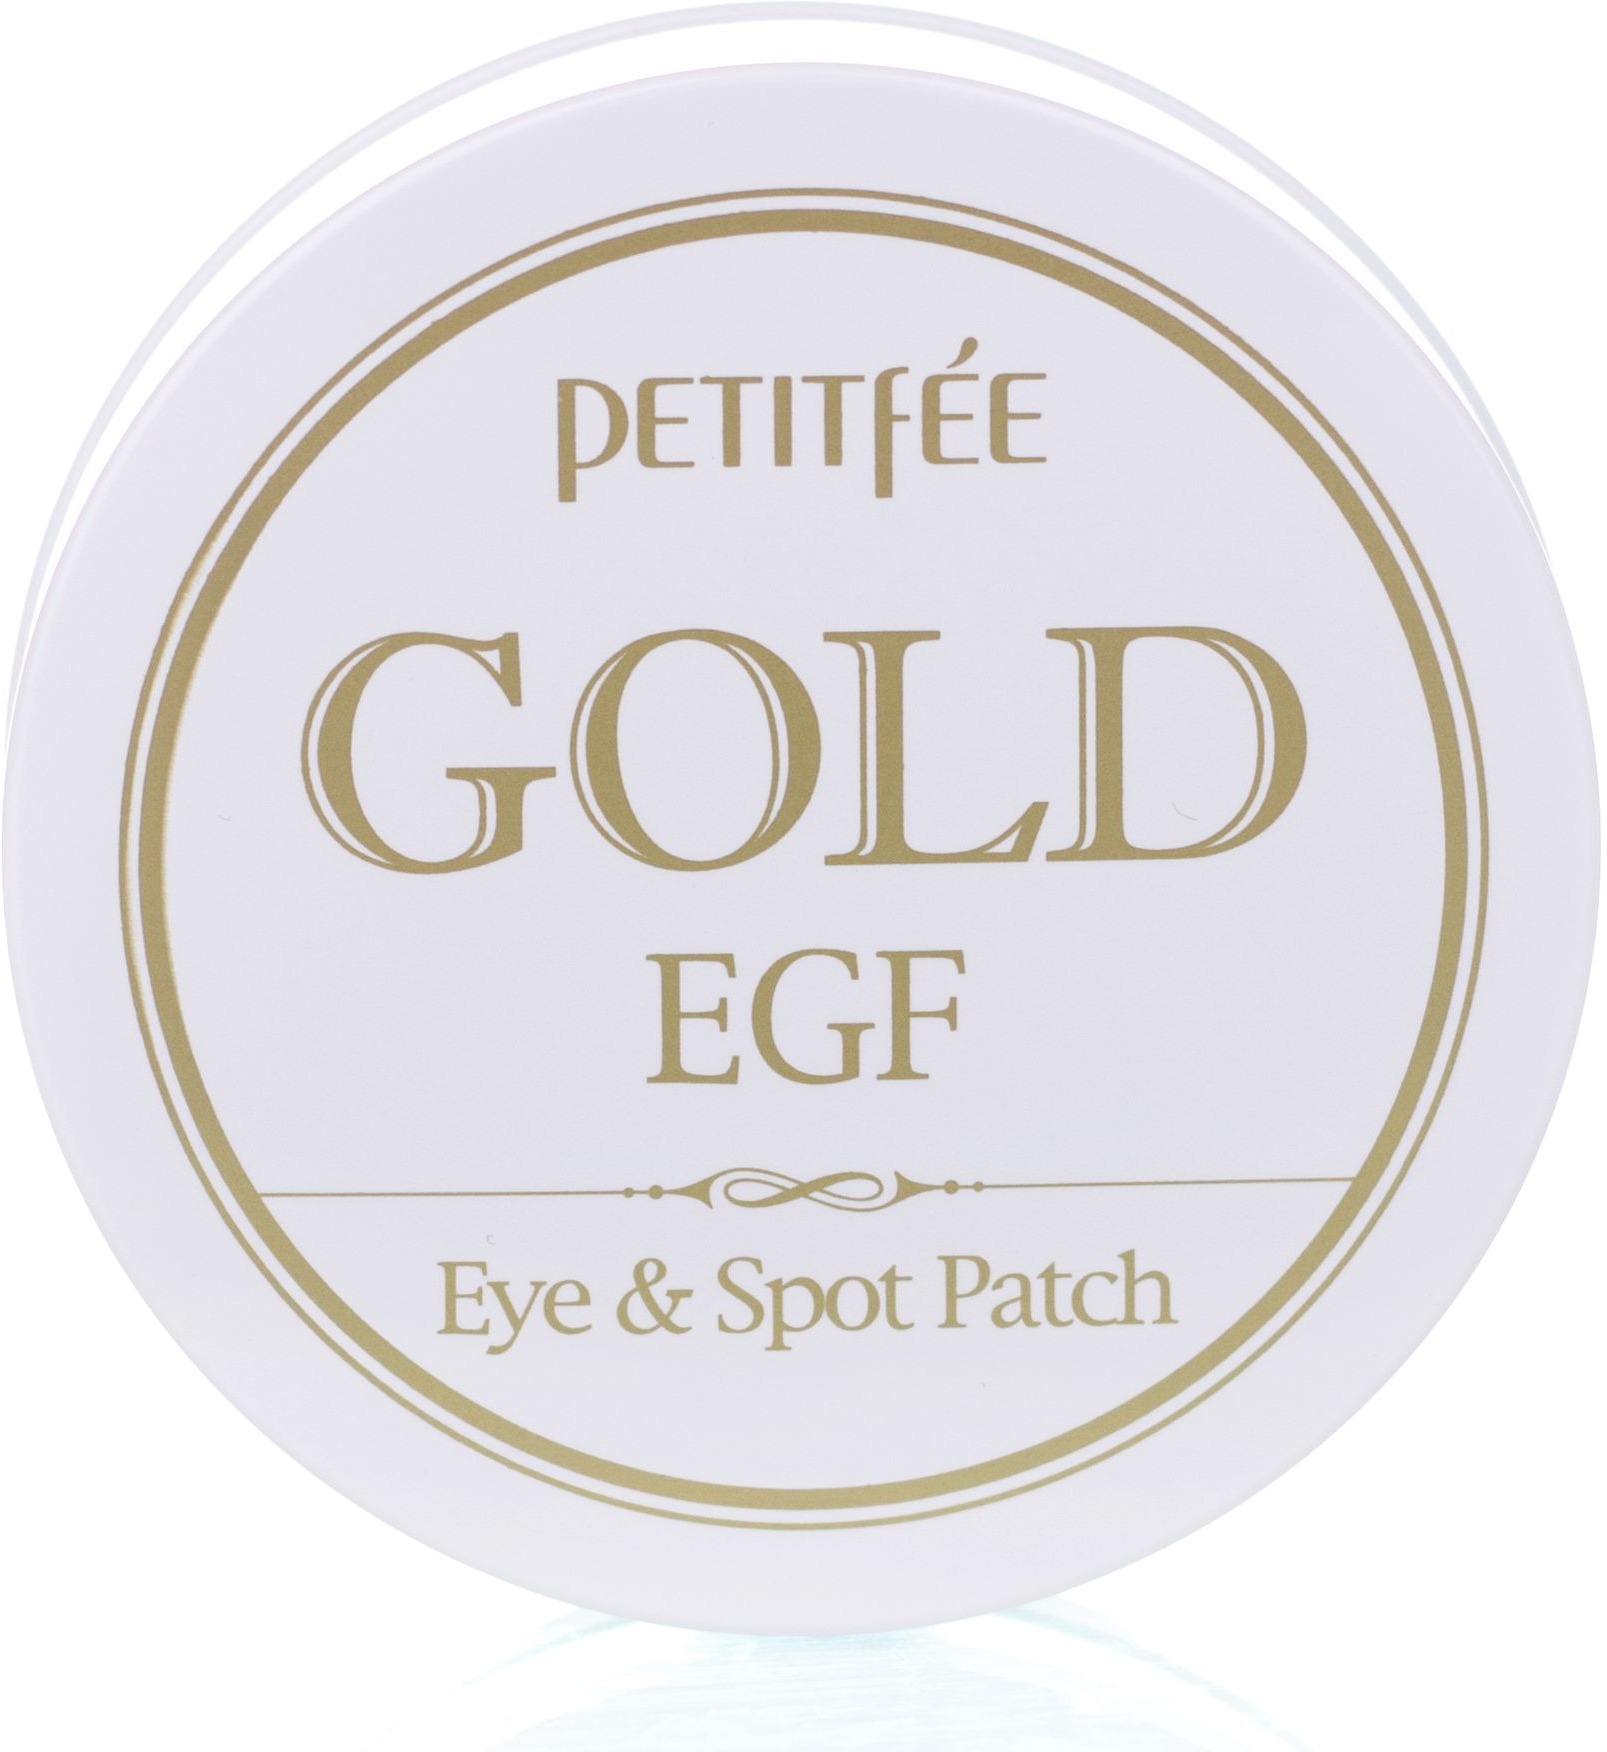 Petitfee Gold And EGF Eye Spot Patch